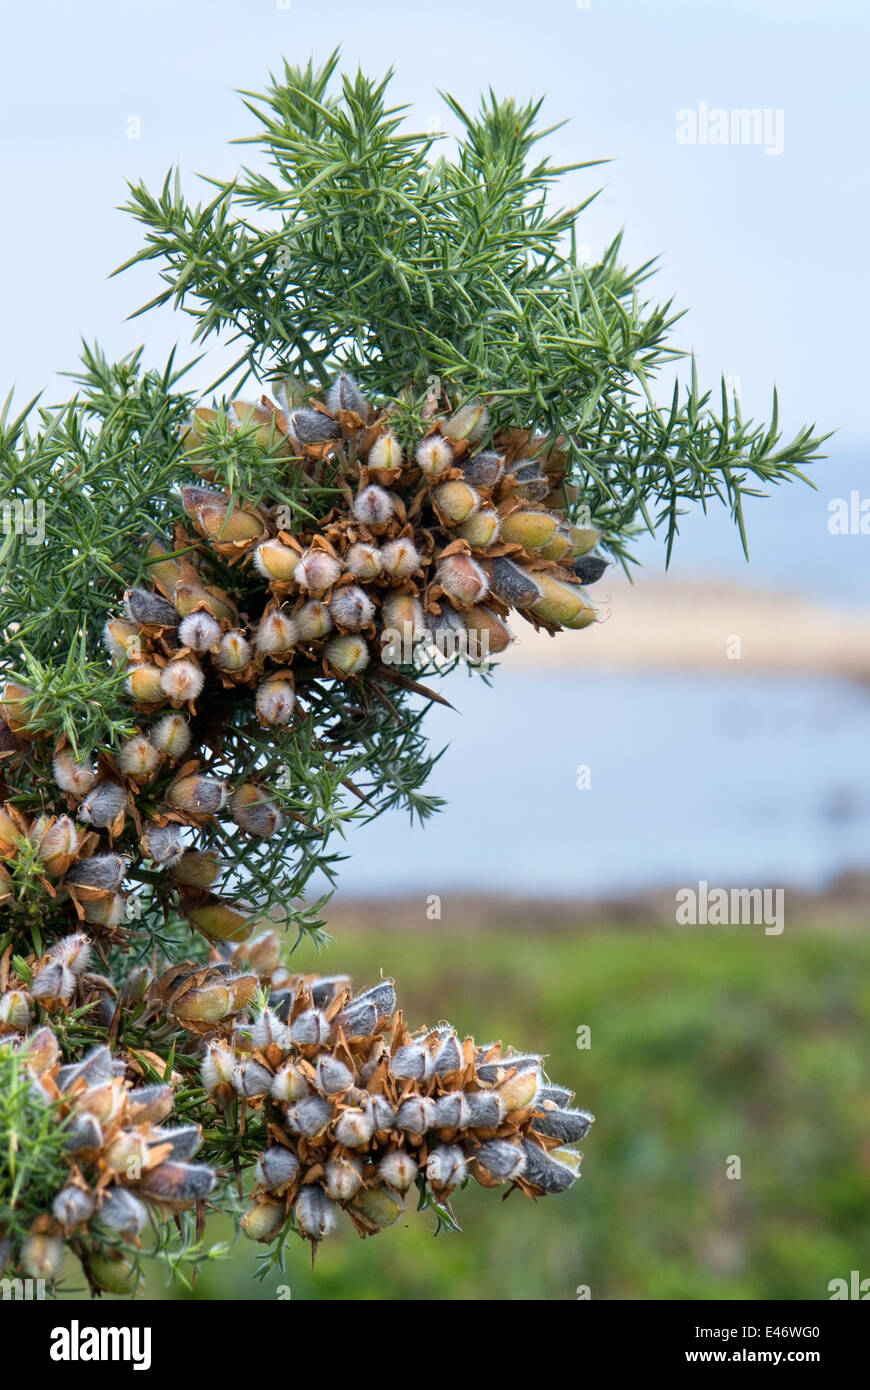 detail of a coniferous plant seen in Brittany, France Stock Photo